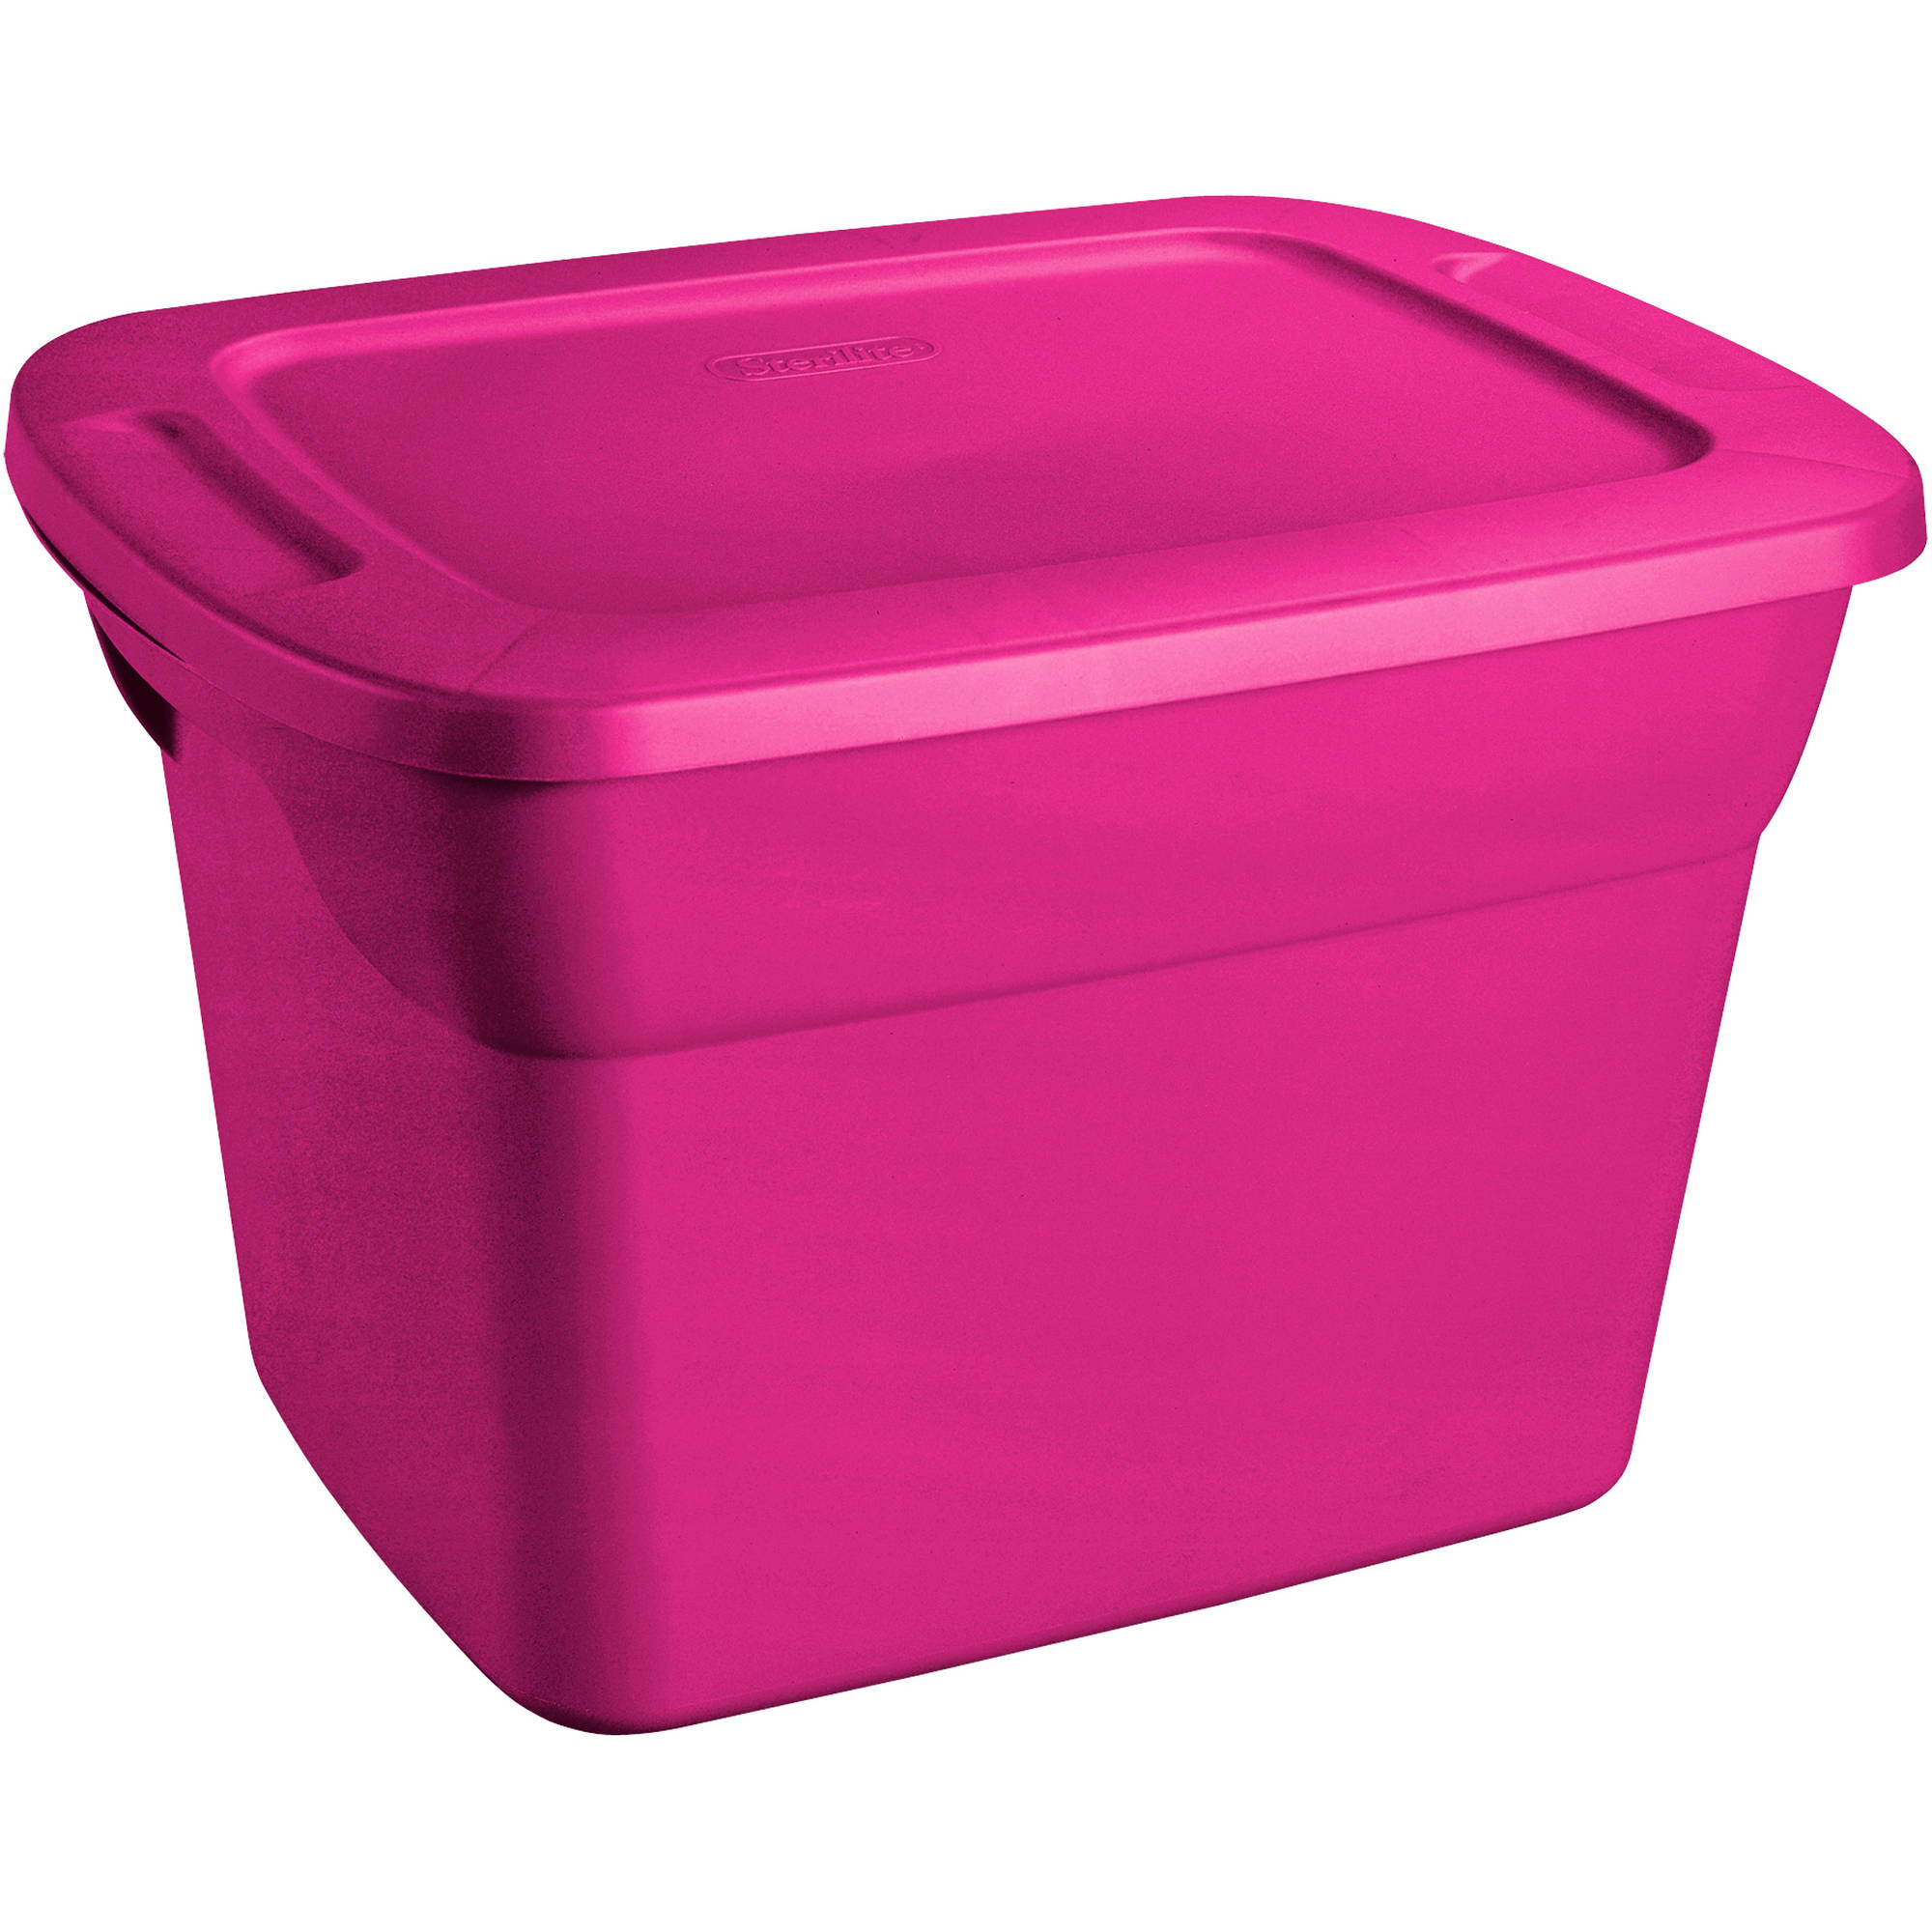 Vertical Plastic Storage Containers Storage Ideas in size 2000 X 2000